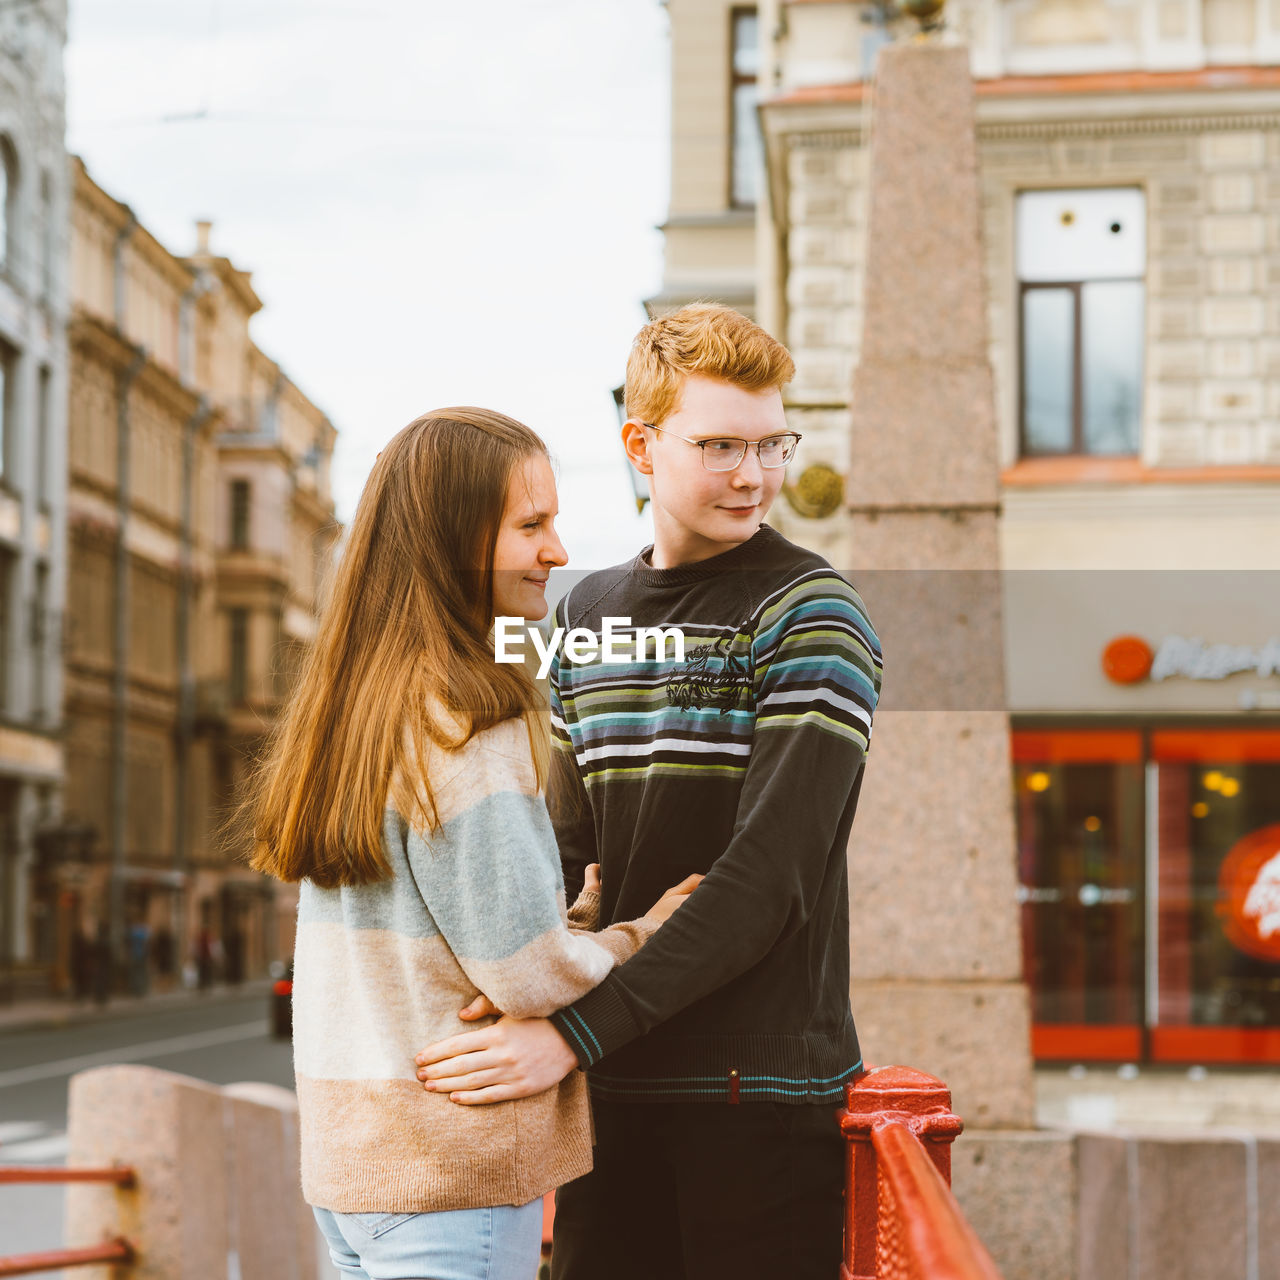 YOUNG COUPLE STANDING ON CITY STREET IN BACKGROUND